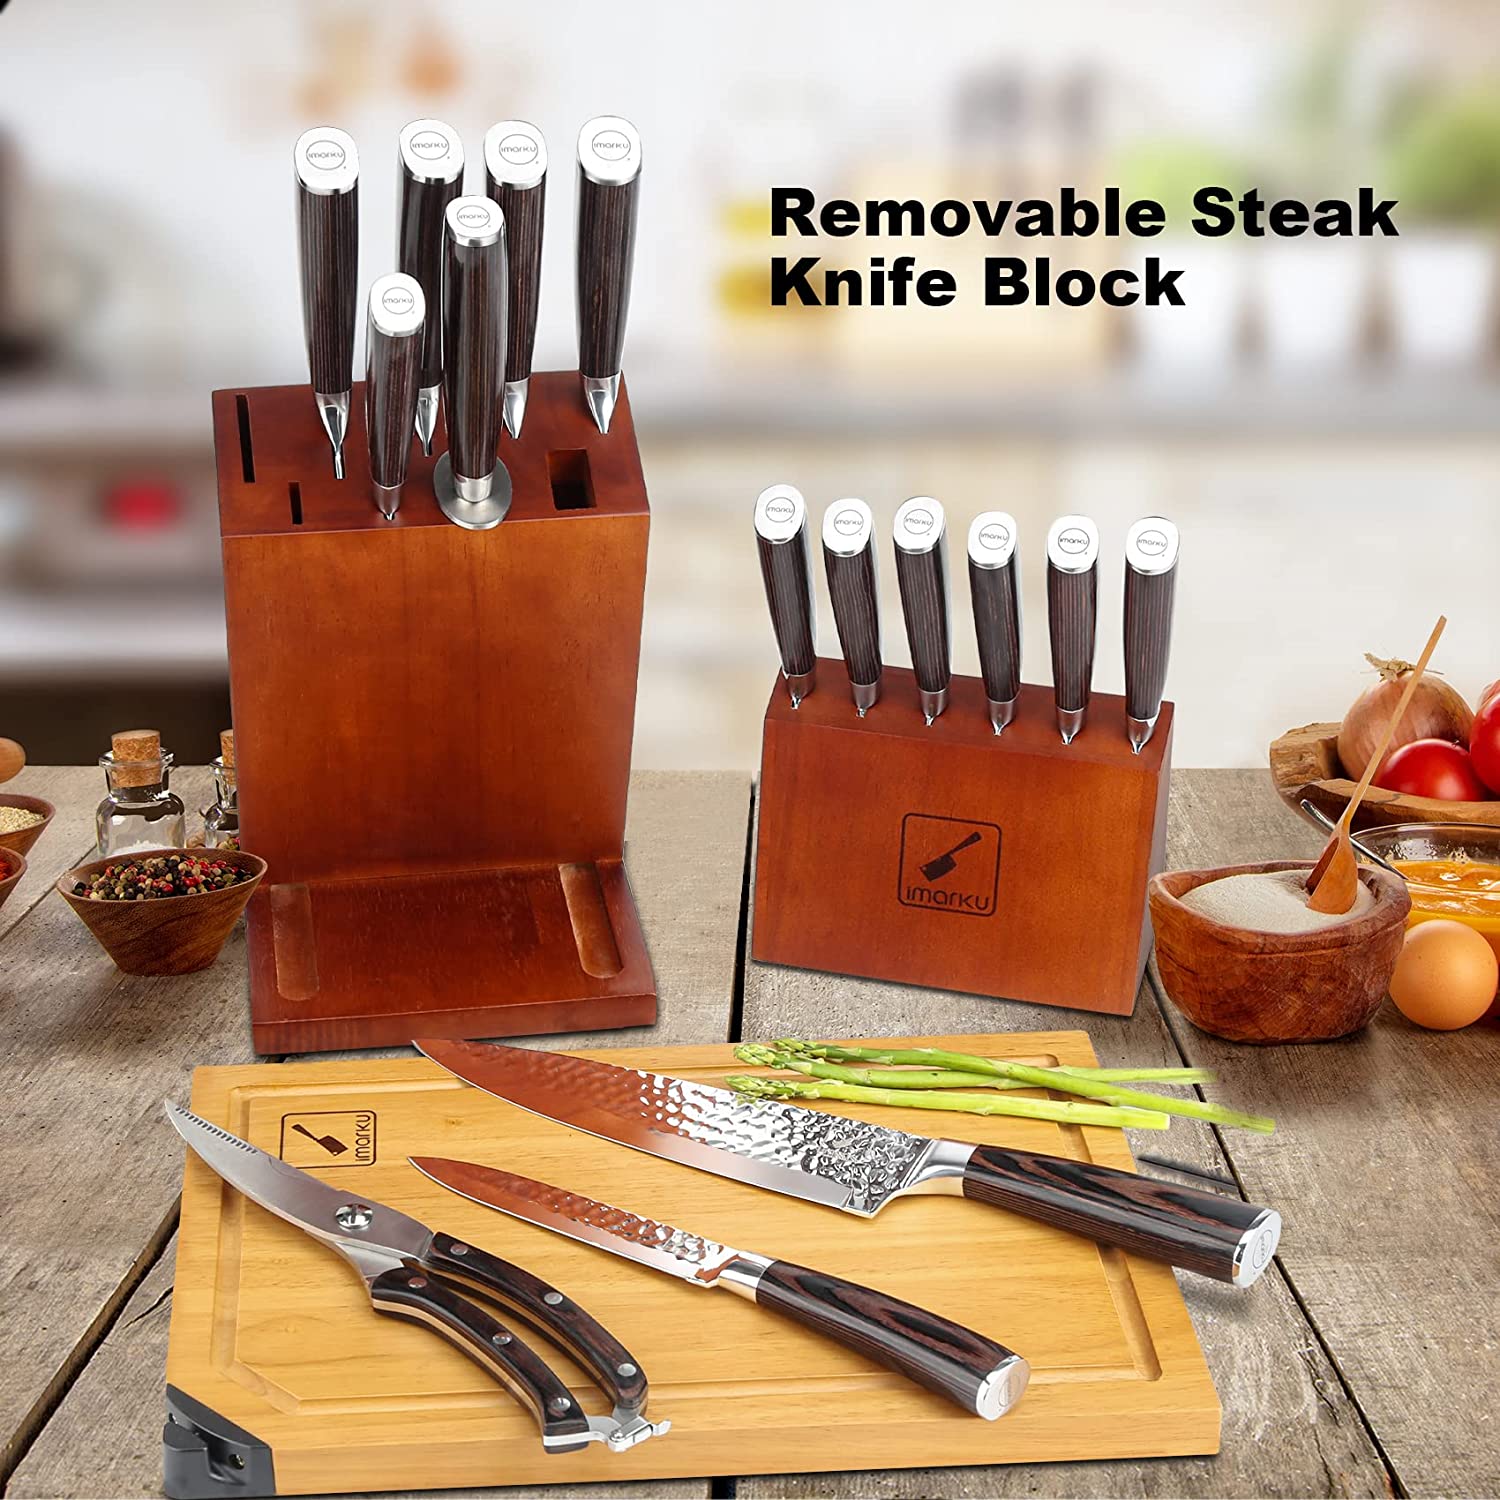 https://cdn.shopify.com/s/files/1/0564/8144/8141/files/16-Piece_Hammered_Japanese_Knife_Set_with_Removable_Block_-6.jpg?v=1641868227